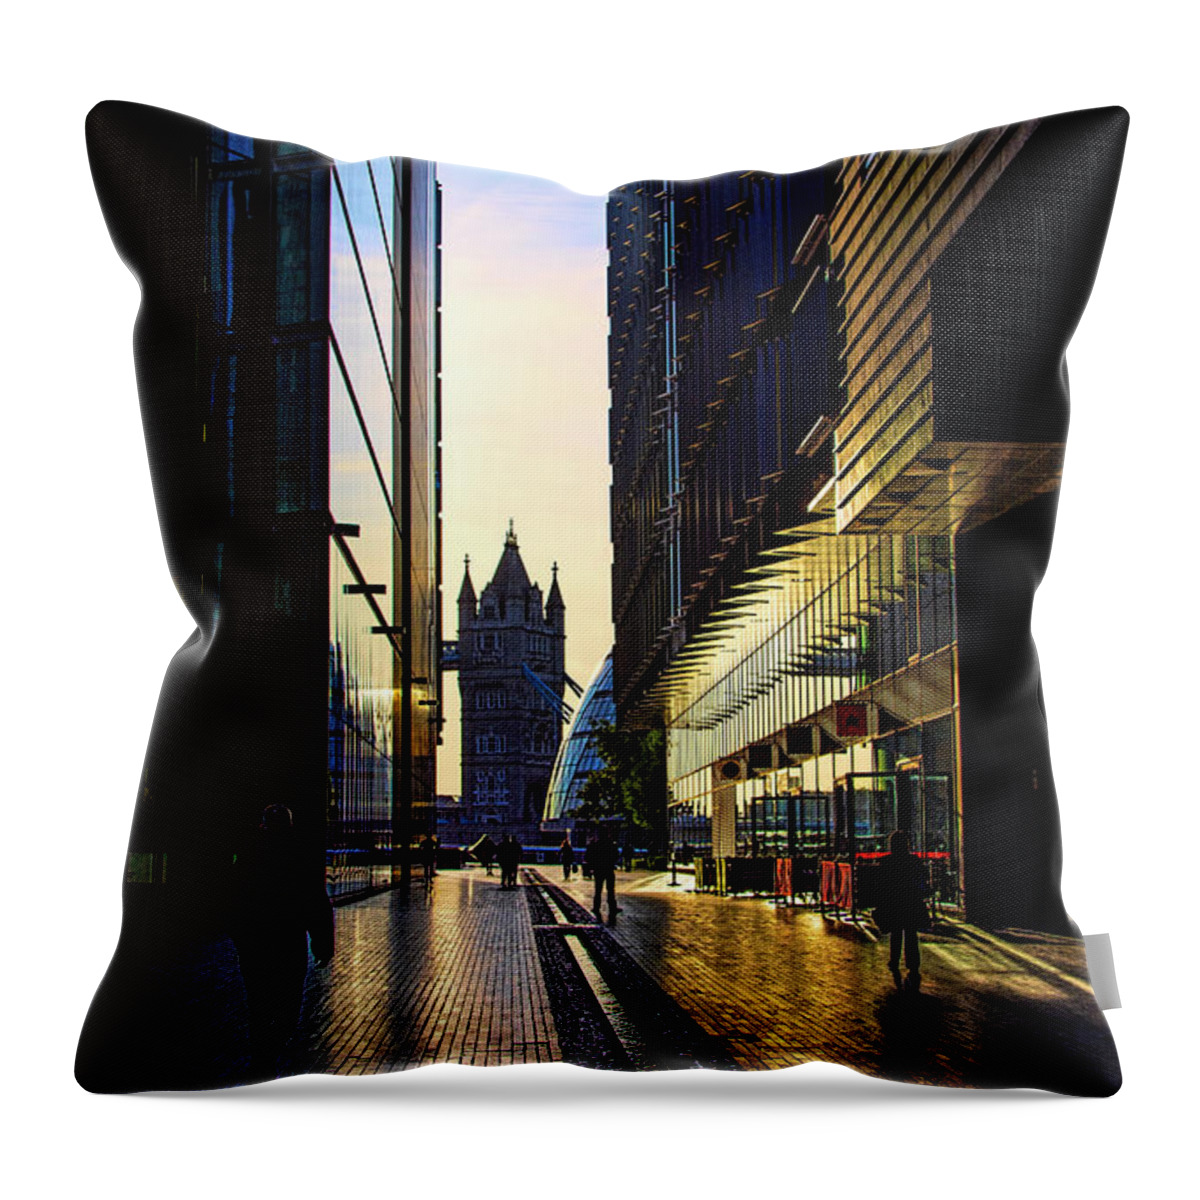 London Throw Pillow featuring the photograph Sunrise on the South Bank by Chris Thaxter